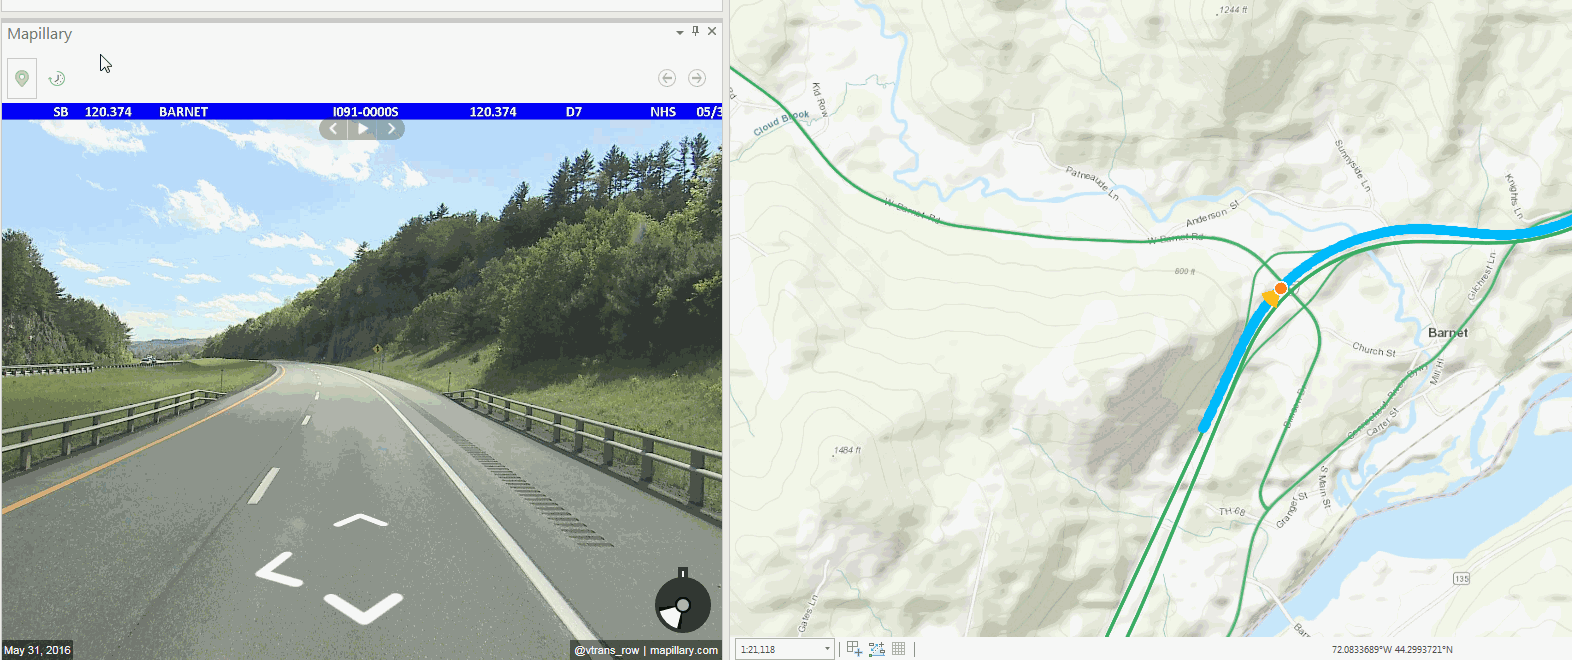 VTrans imagery "time travel" in ArcGIS Pro